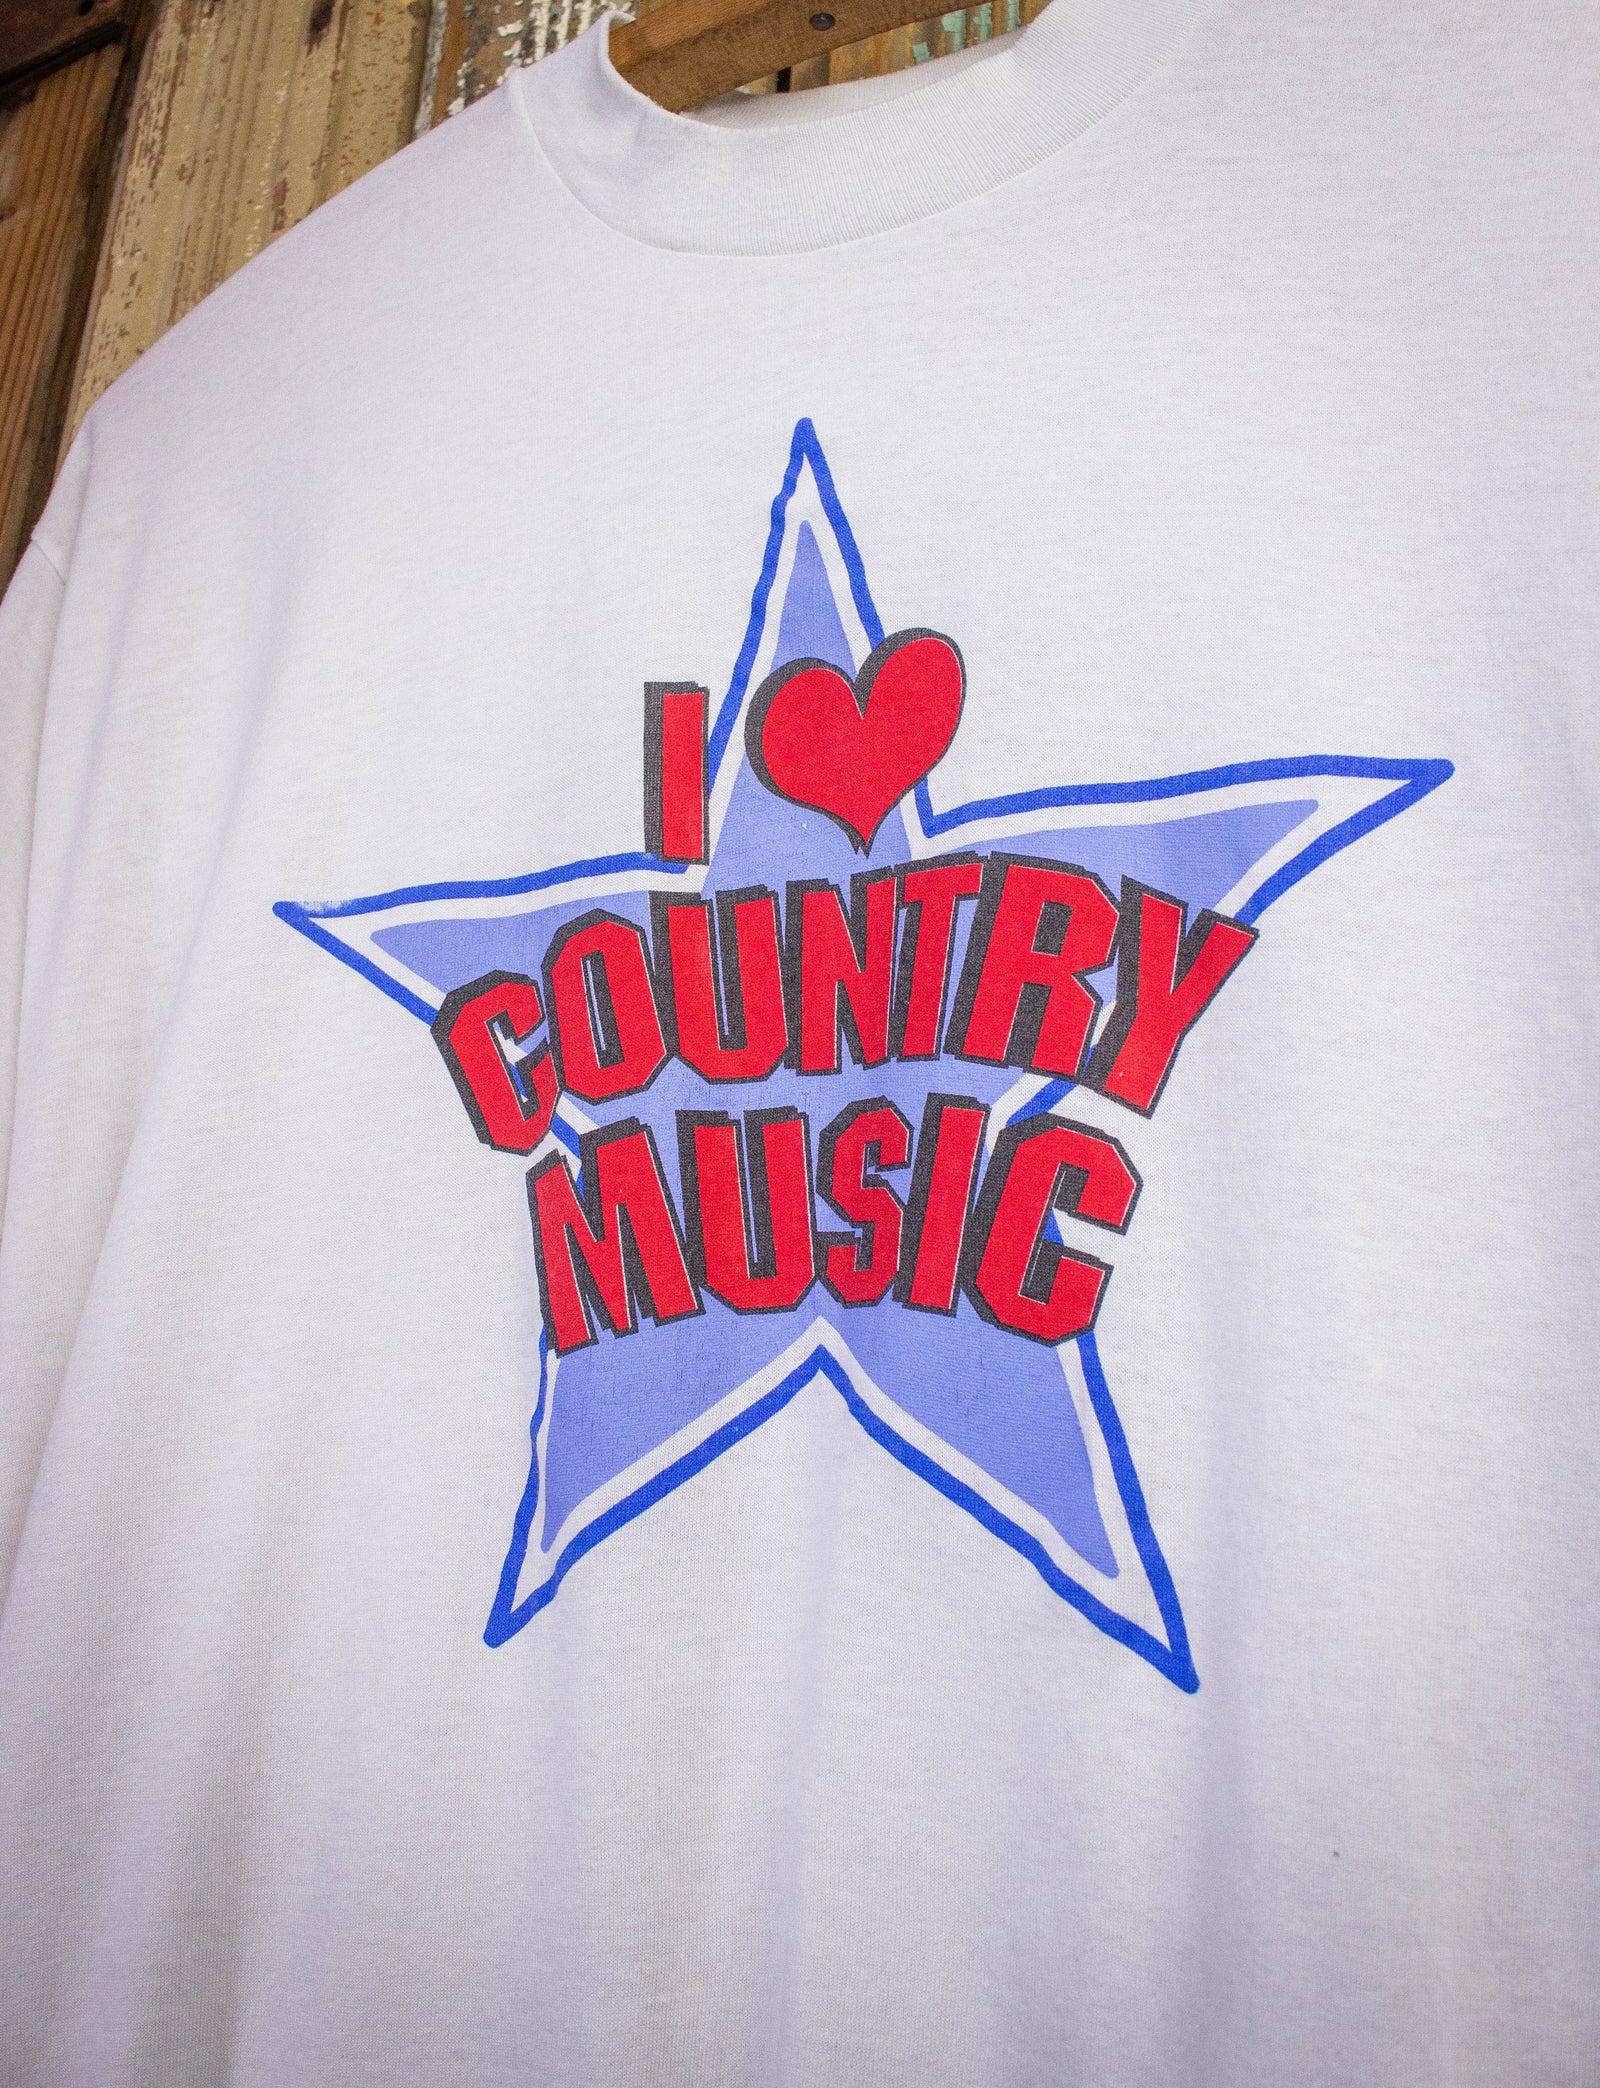 Vintage I Love Country Music Graphic T Shirt 80s White XL